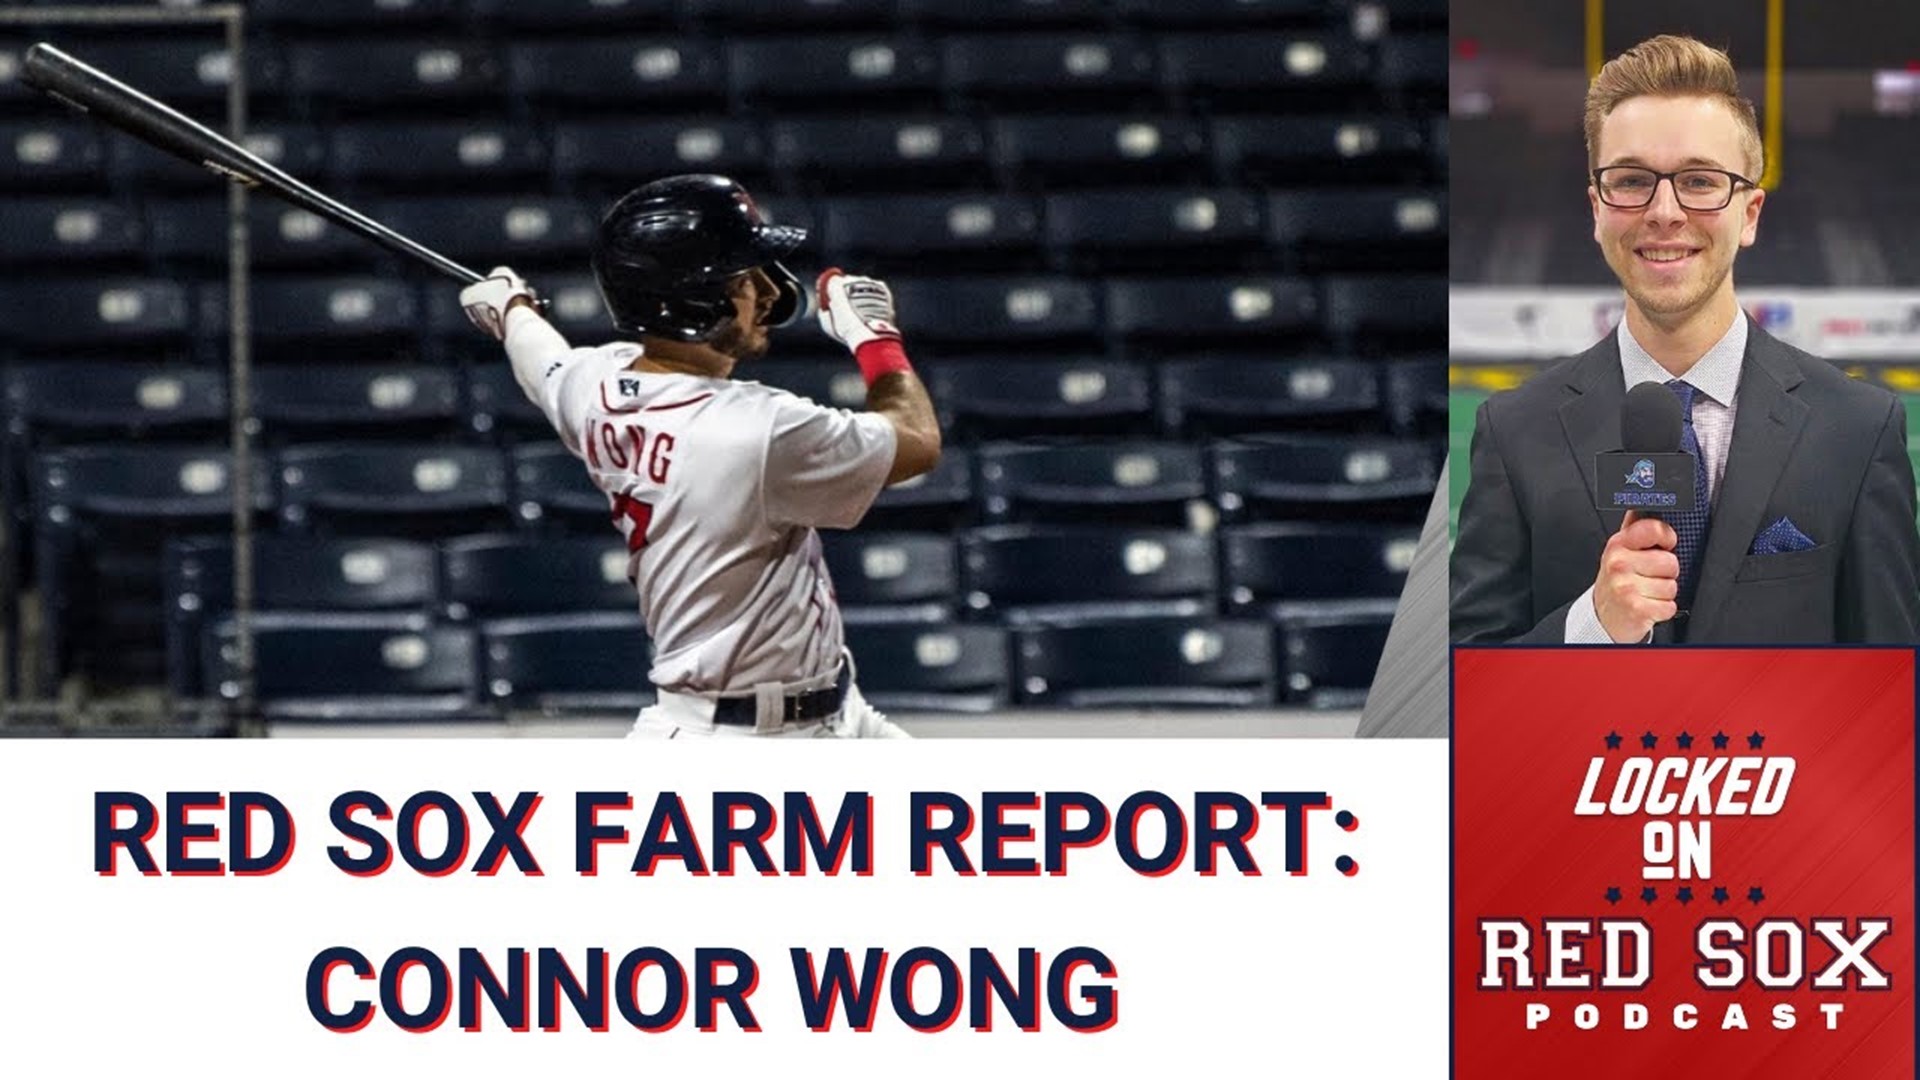 Red Sox Farm Report: Connor Wong Talks Success At Plate, Hobbies